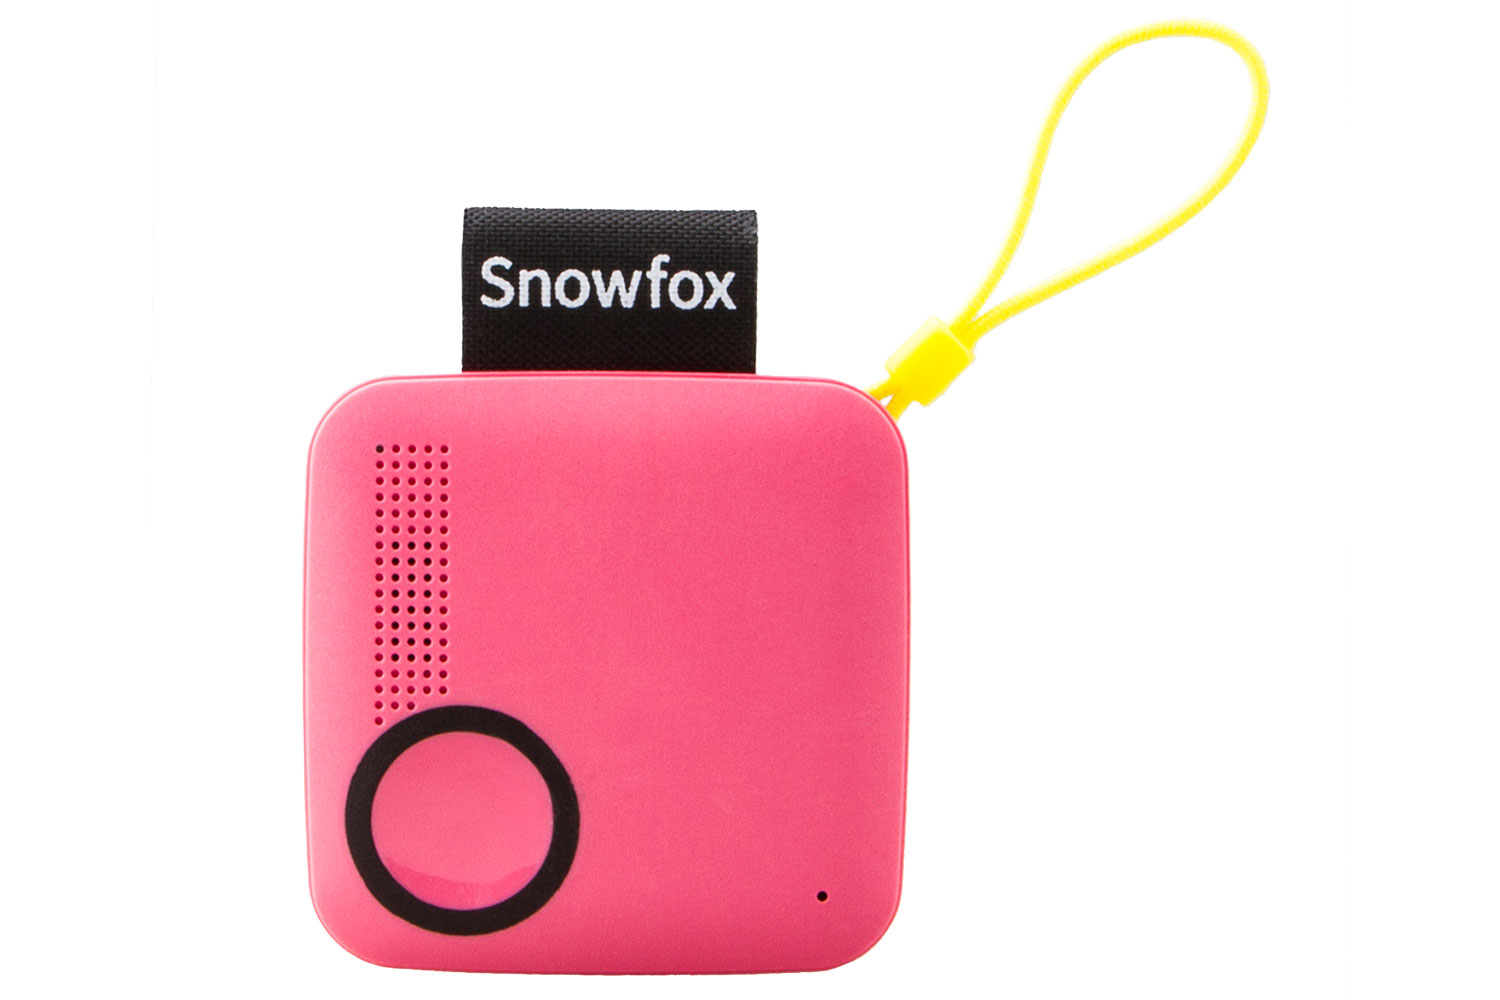 snowfox trackerphone indiegogo launch pink front